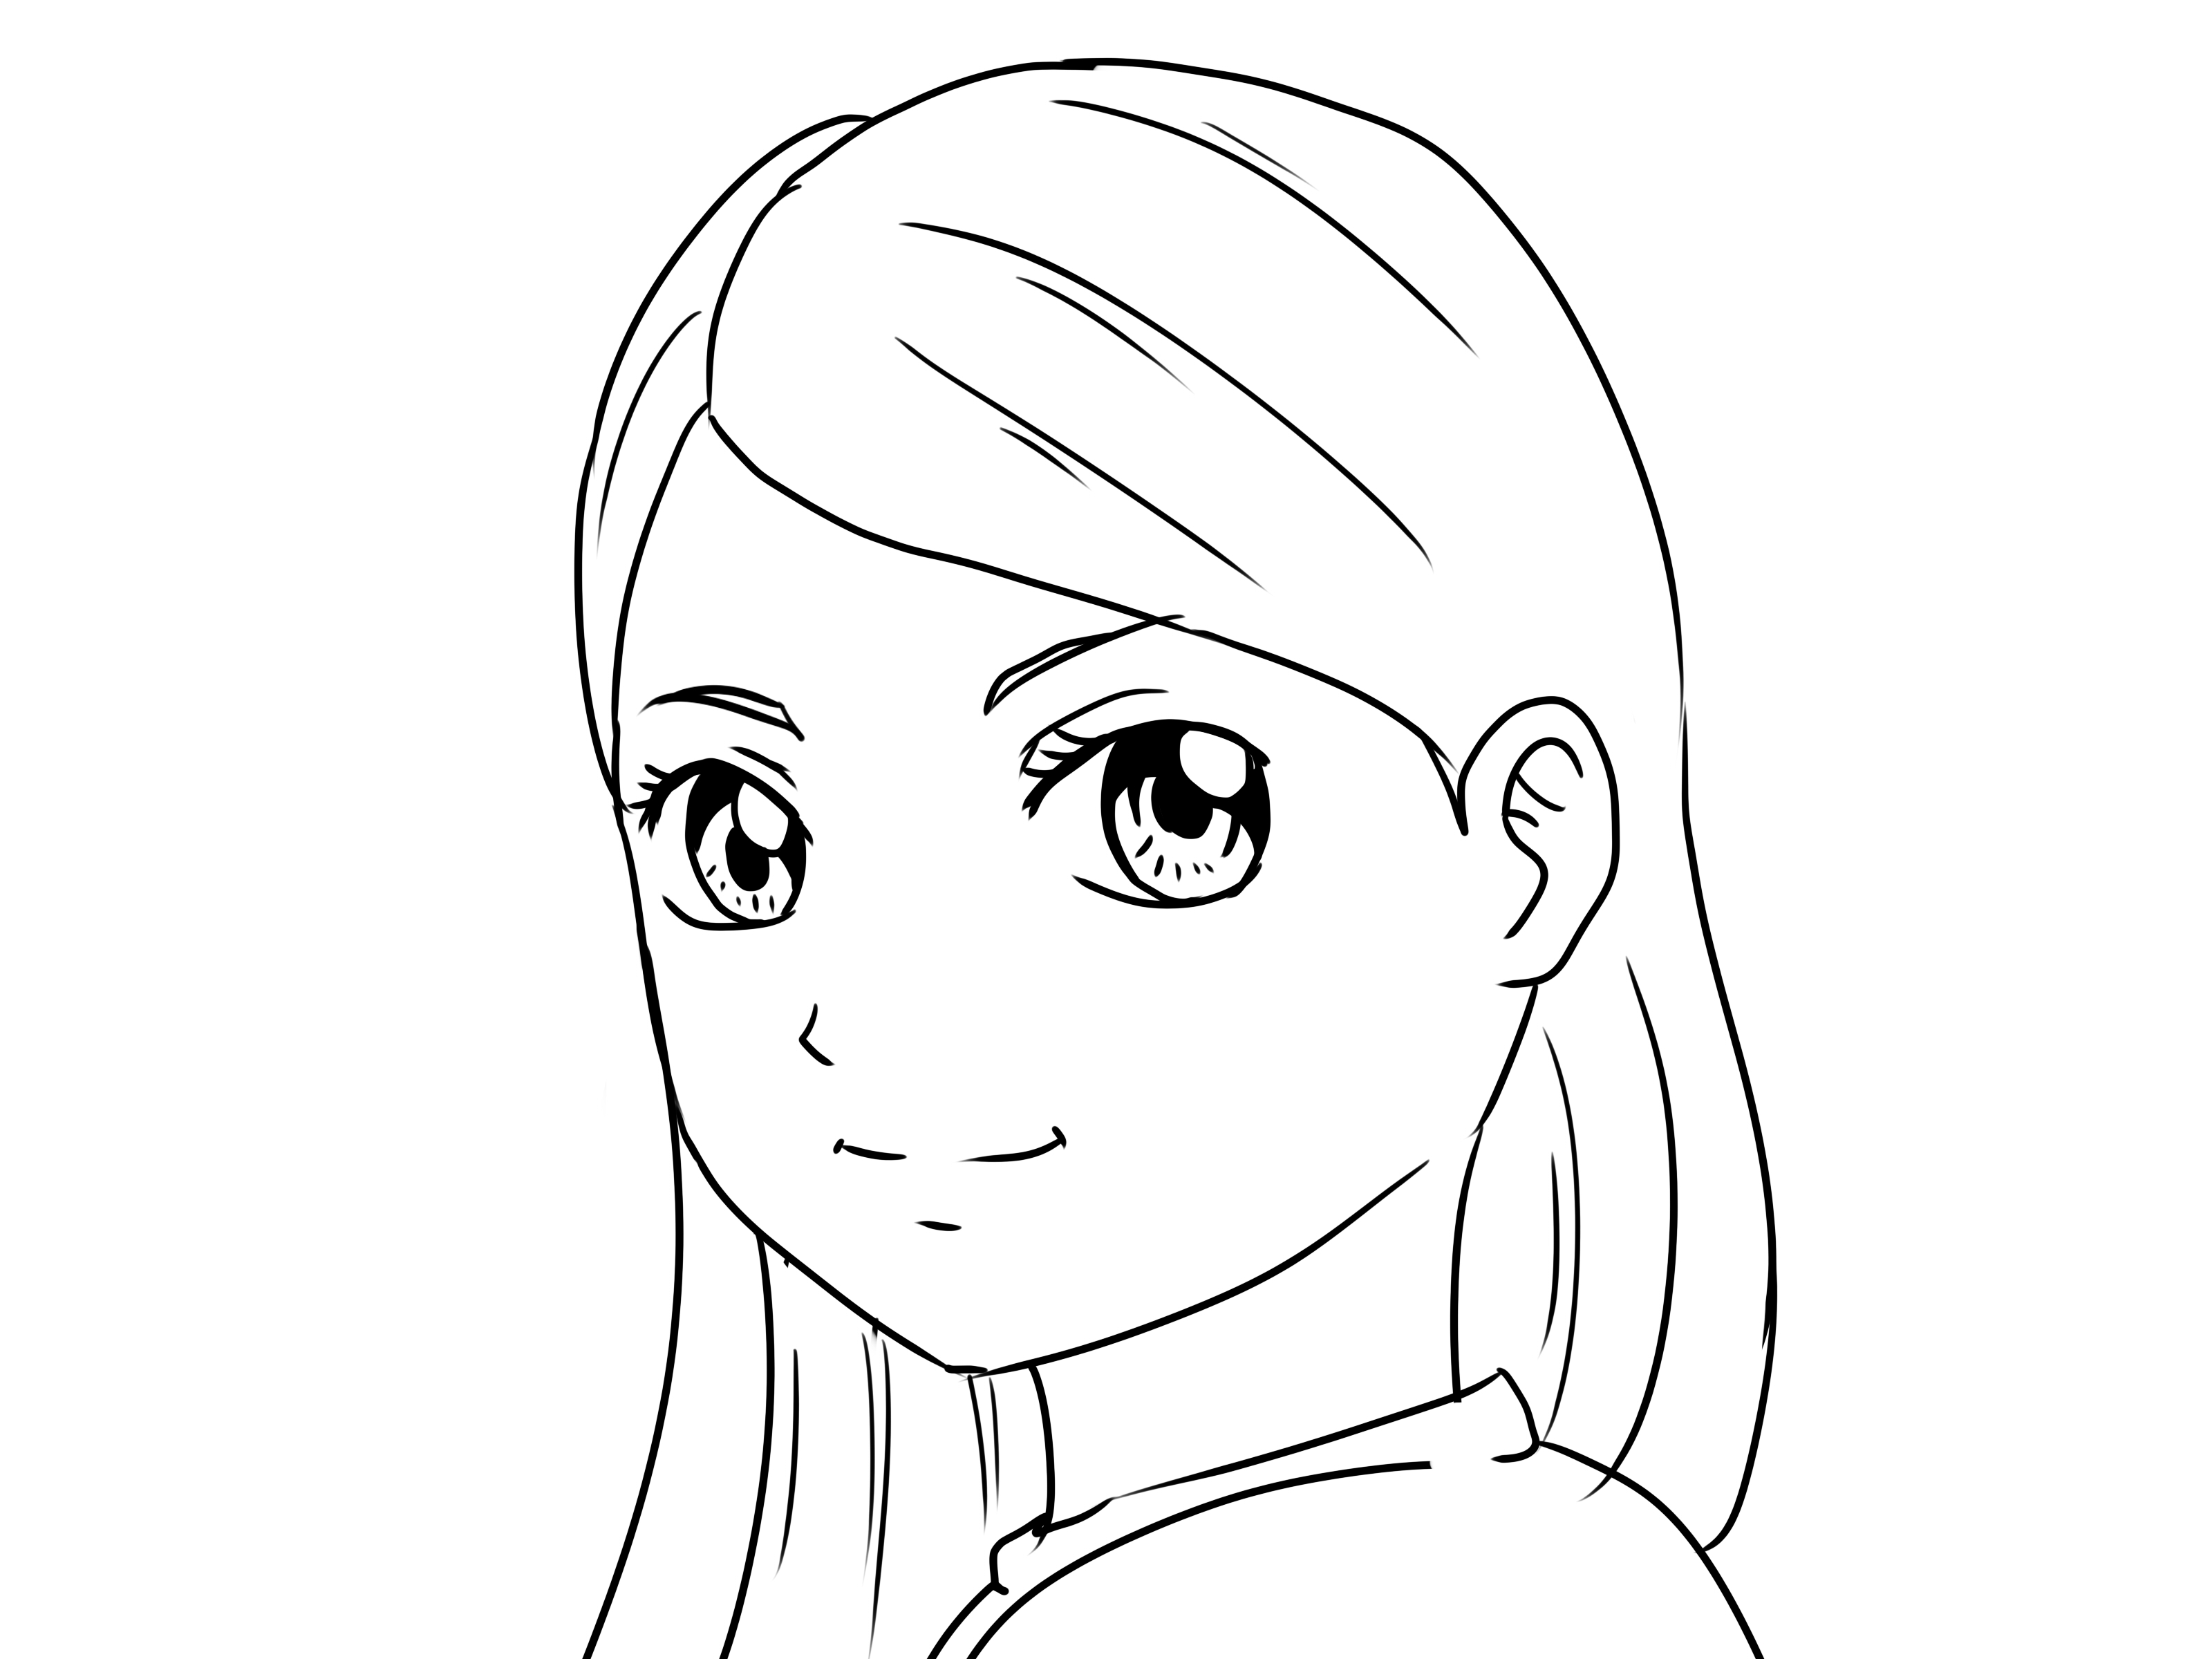 Free Easy Girl Drawing, Download Free Clip Art, Free Clip